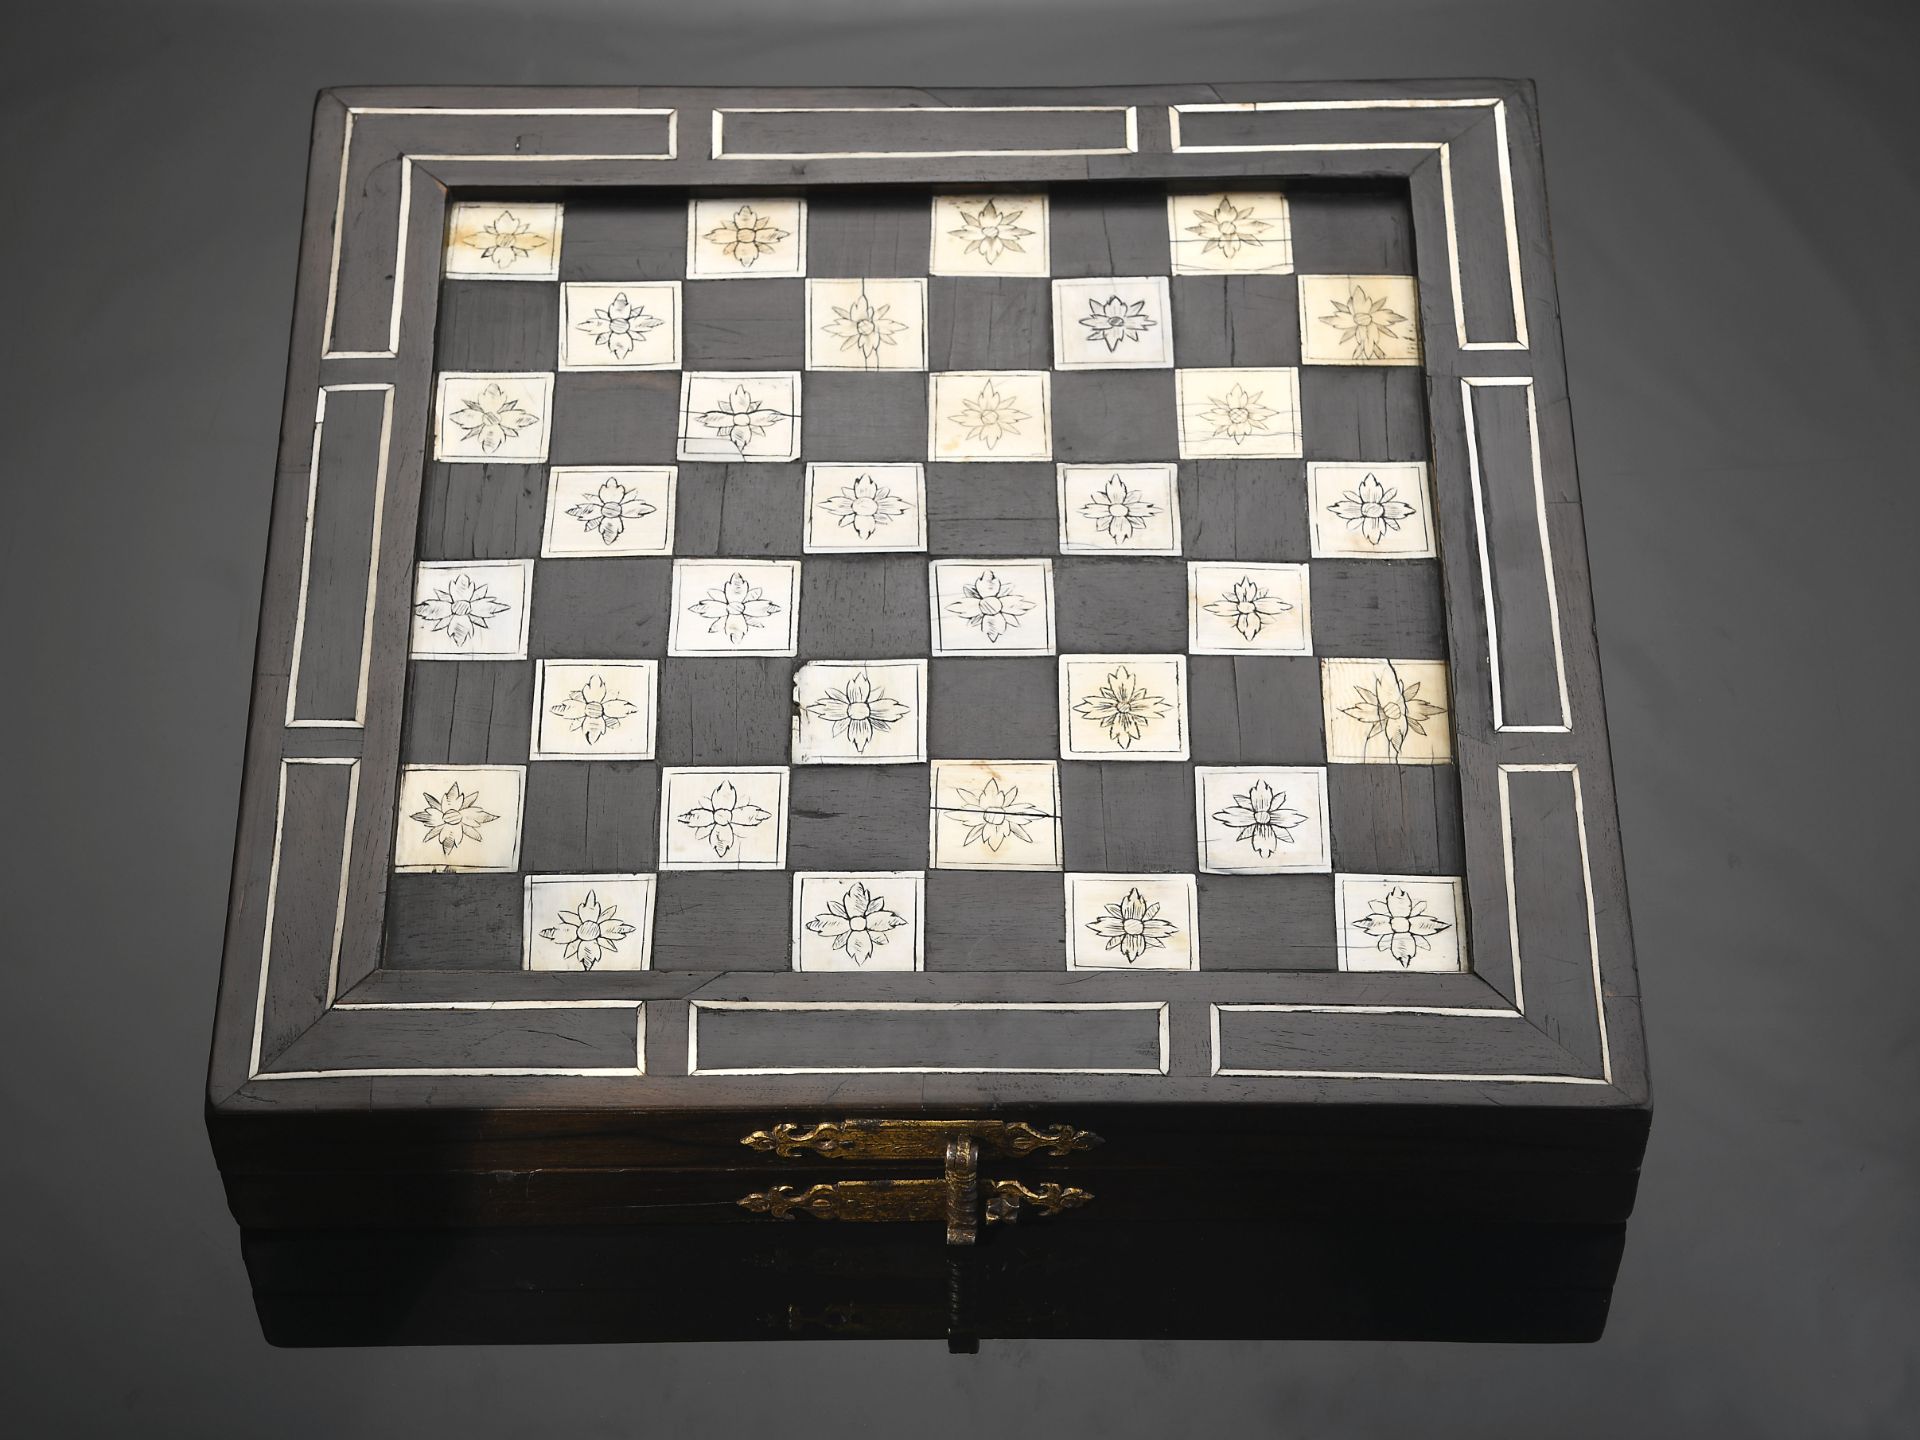 Chess, Backgammon and Nine Men’s Morris (Mill game) board articulated and closing in the shape of a 